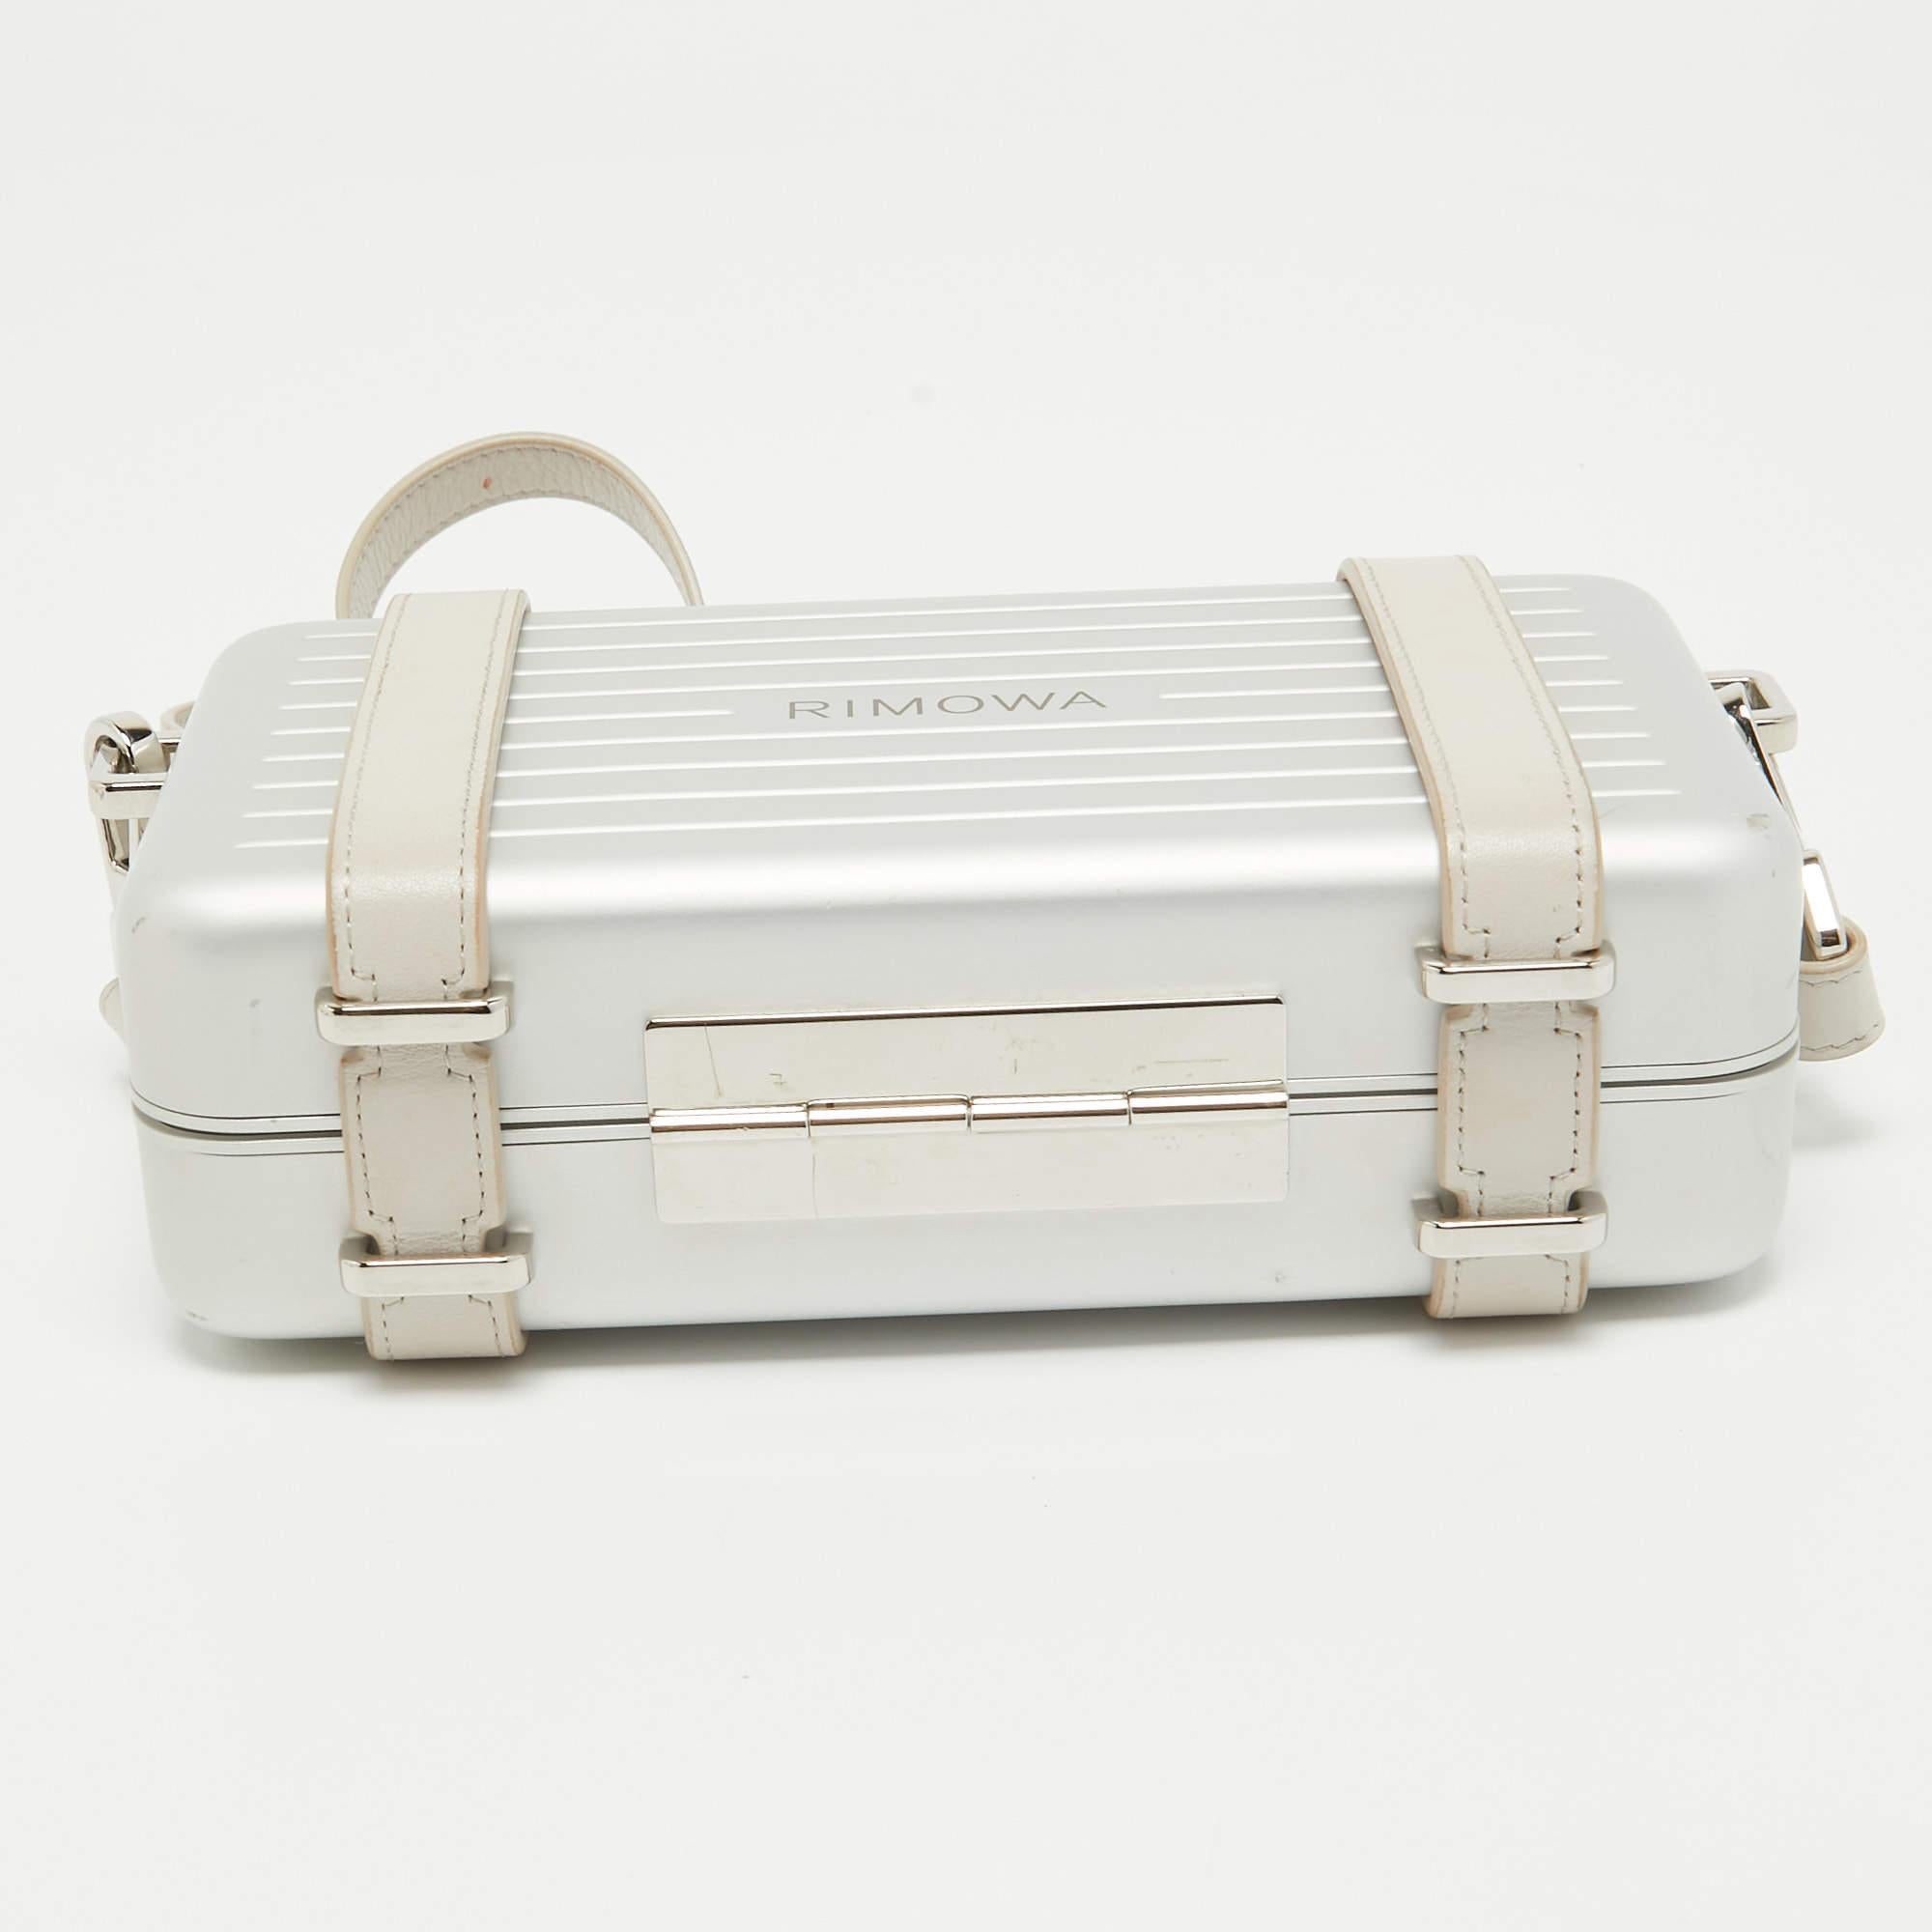 Dior x Rimowa Off White/Grey Aluminum and Leather Personal Clutch Bag 13